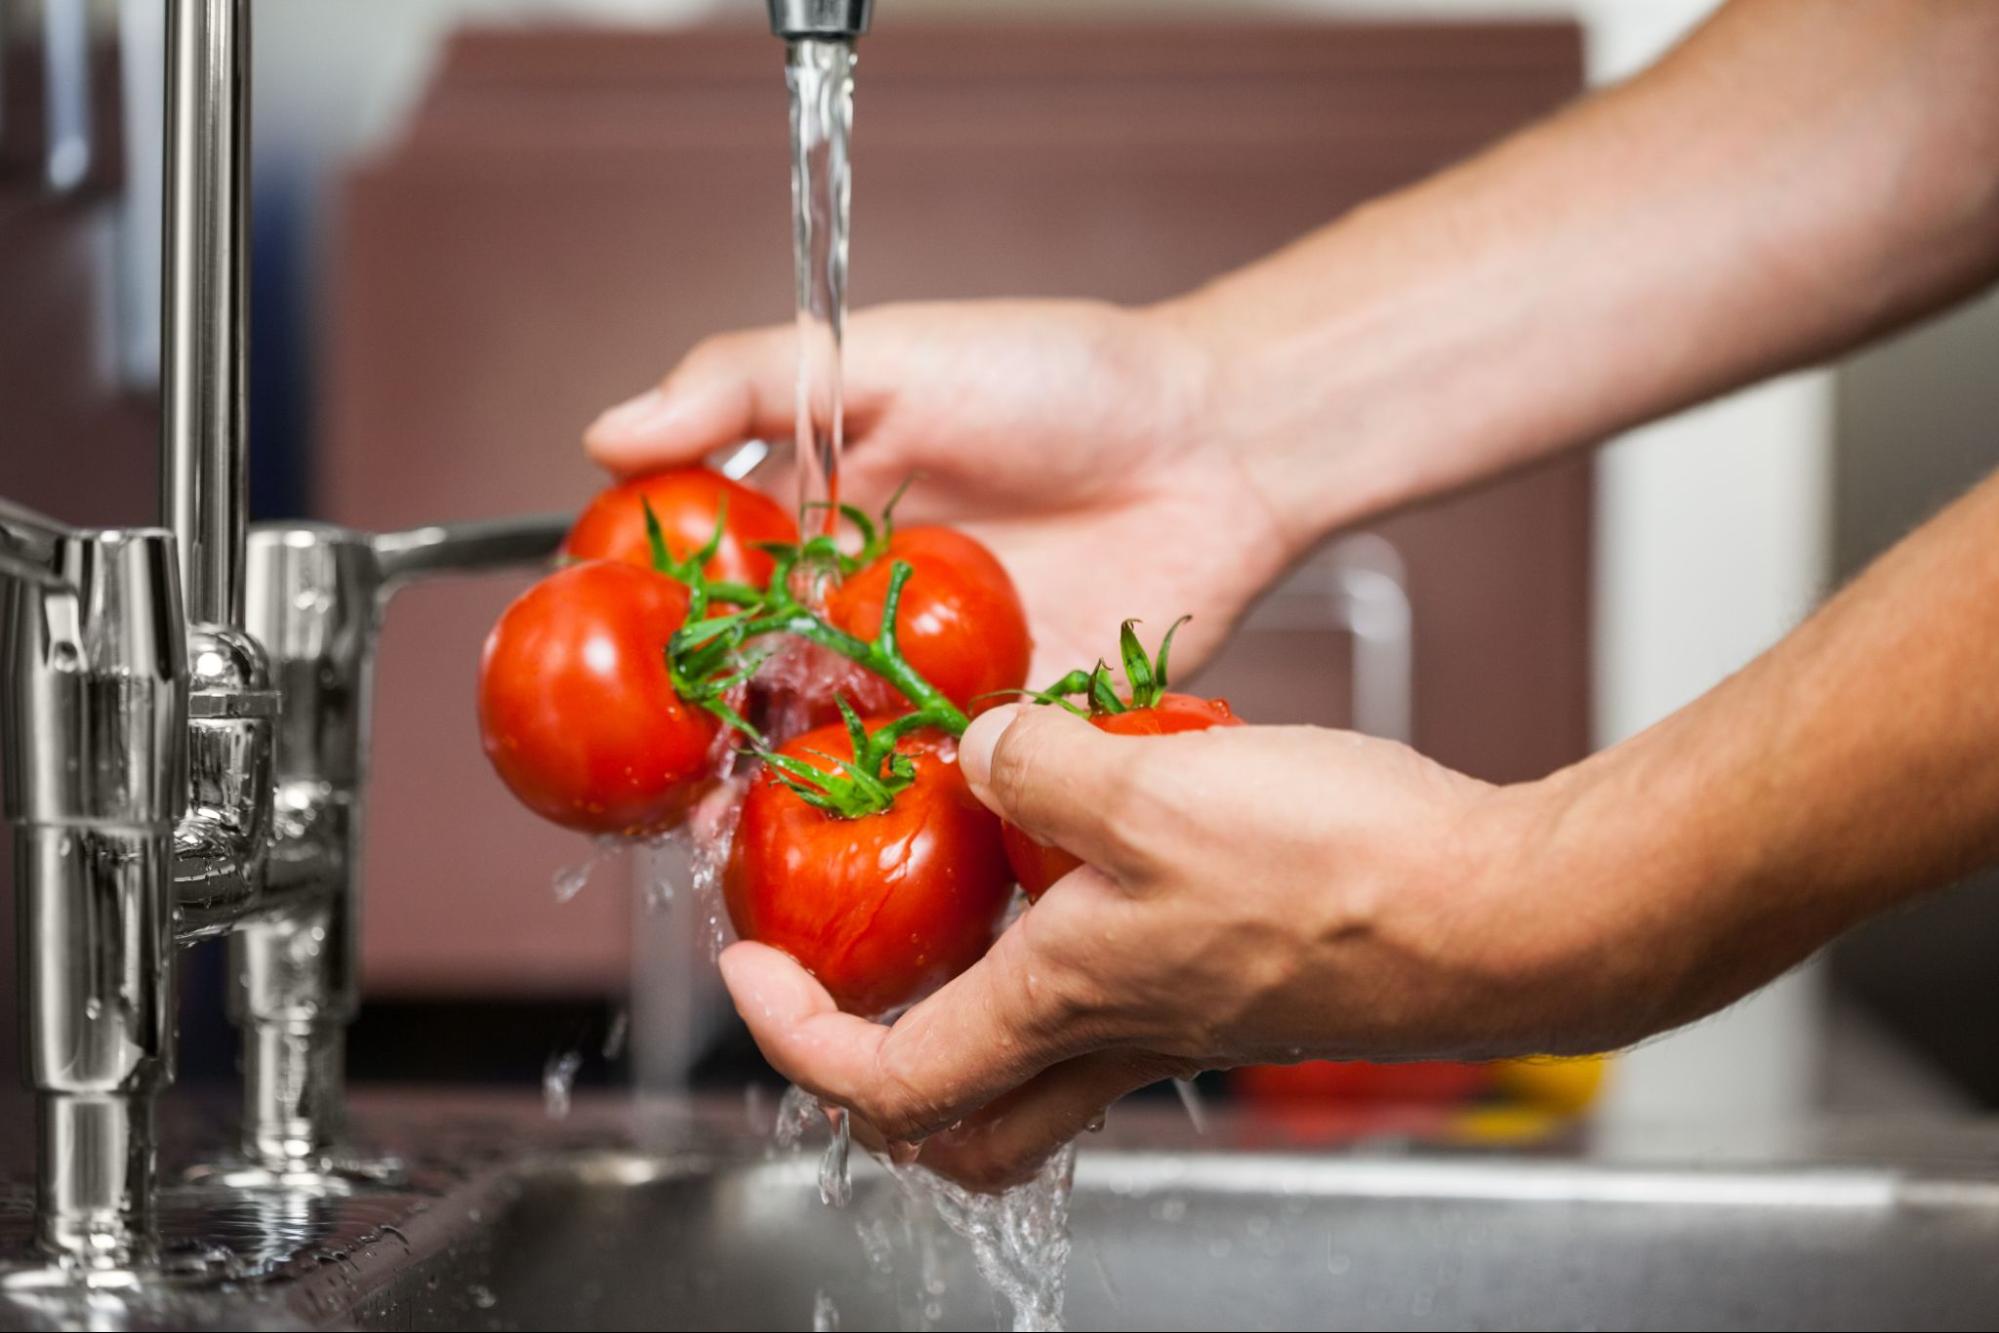 A person washes tomatoes in the sink to prepare for cooking.